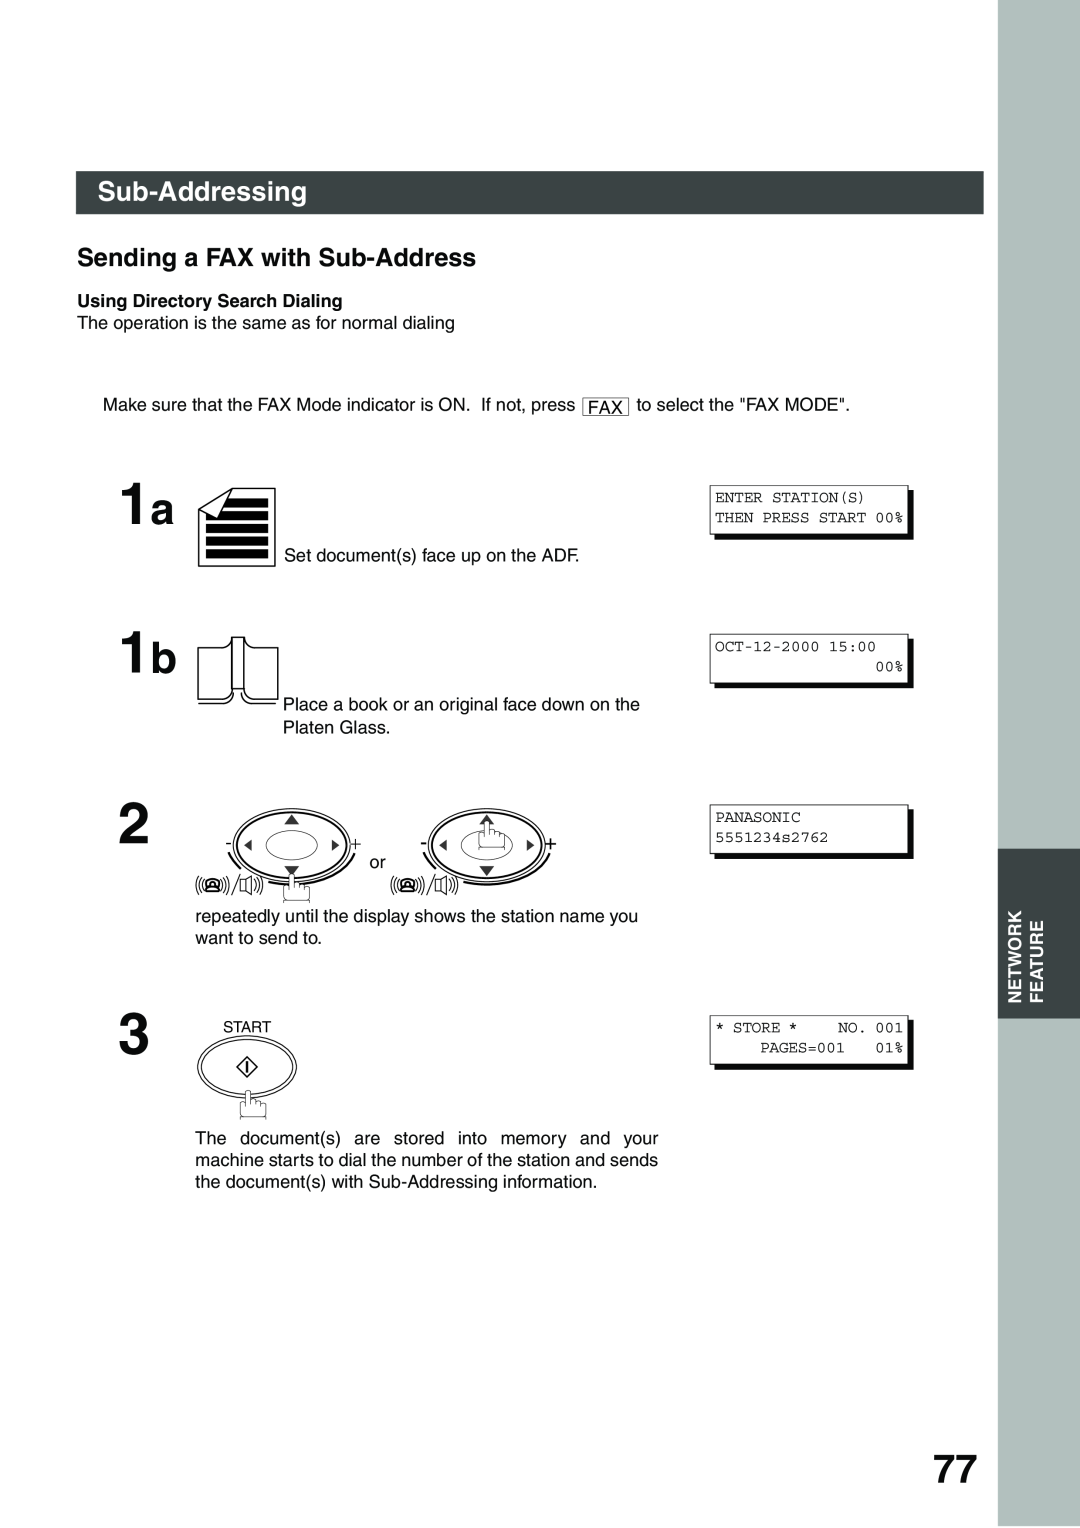 Panasonic DP-135FP appendix Sending a FAX with Sub-Address, Sub-Addressing, Using Directory Search Dialing 